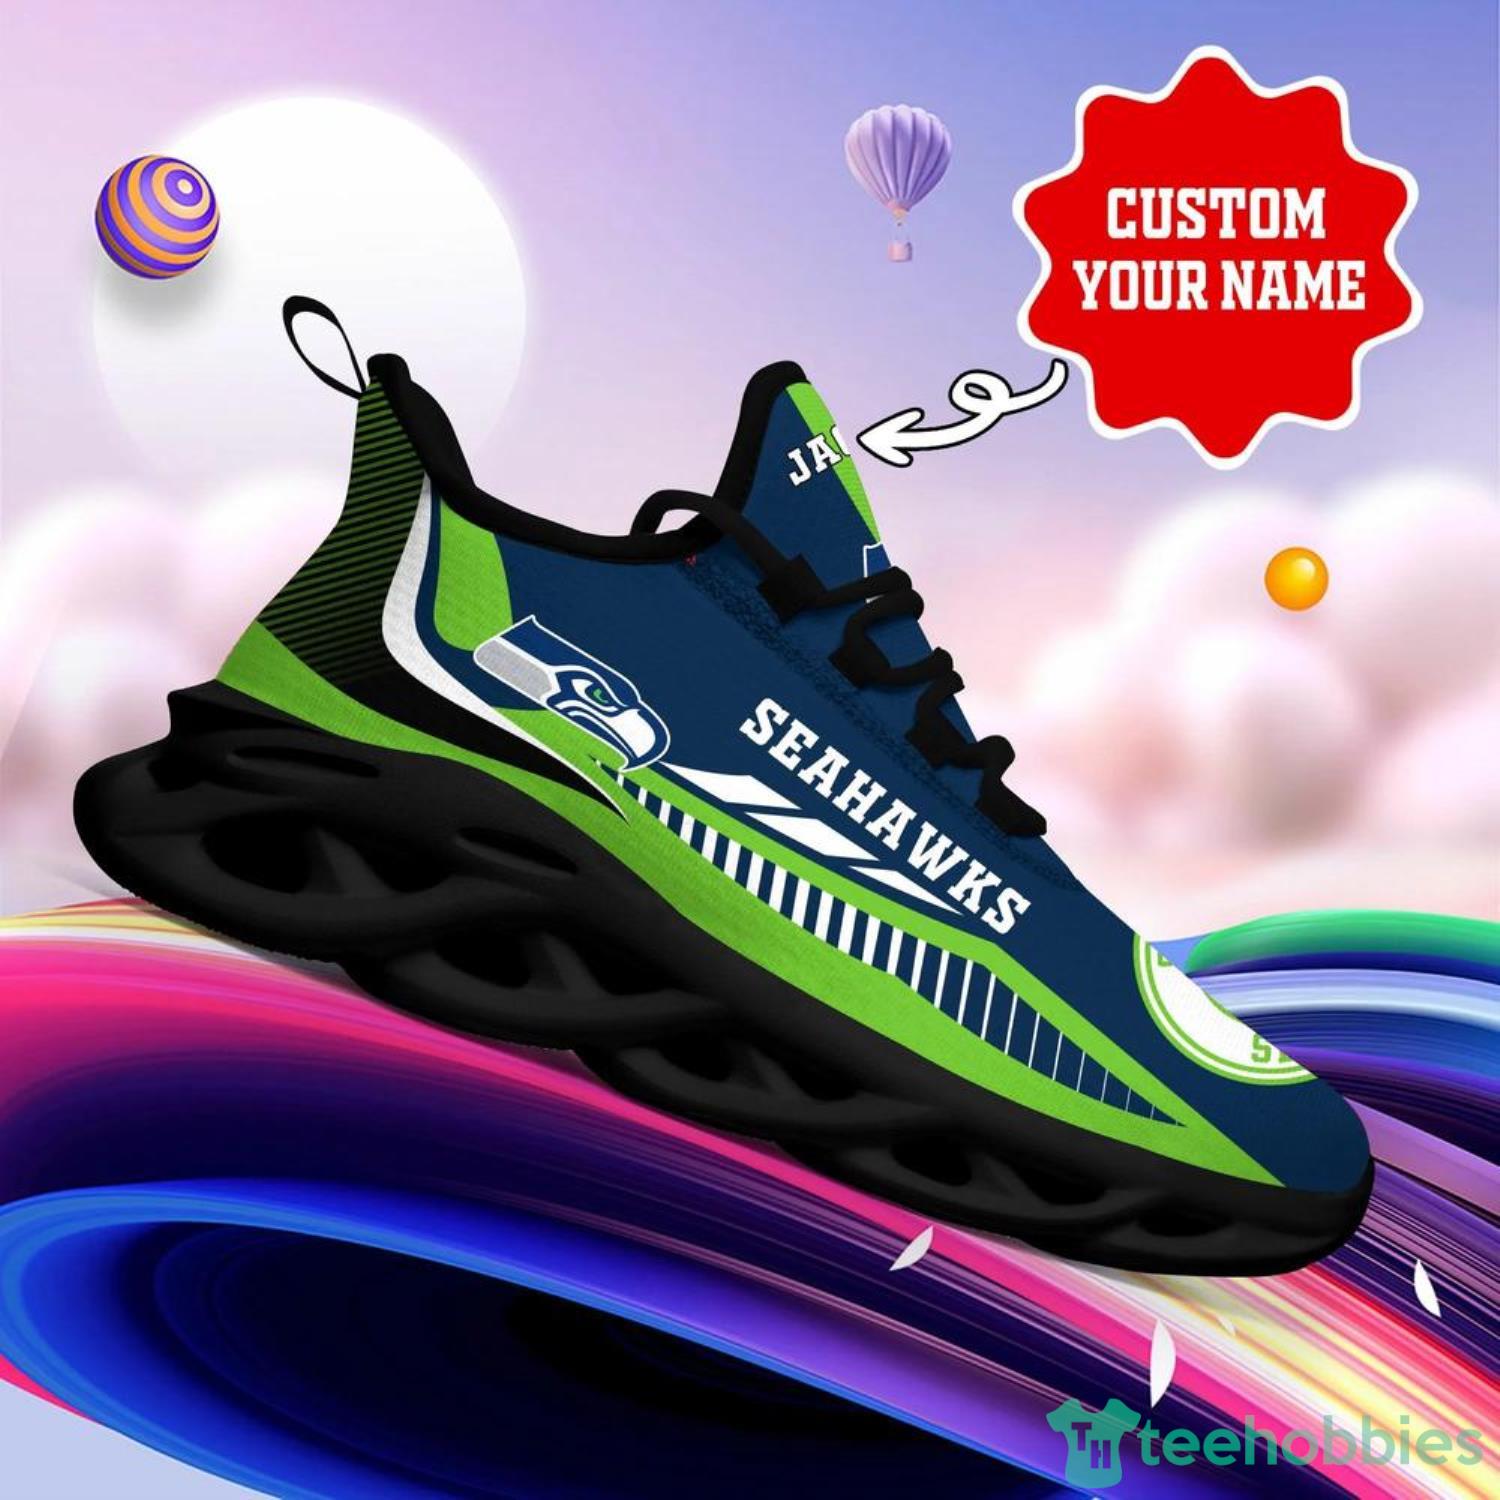 Seattle Seahawks Vibrant Ugly Christmas Snow Flowers Blue Color Sneakers  Max Soul Shoes For Fans Gift - Banantees